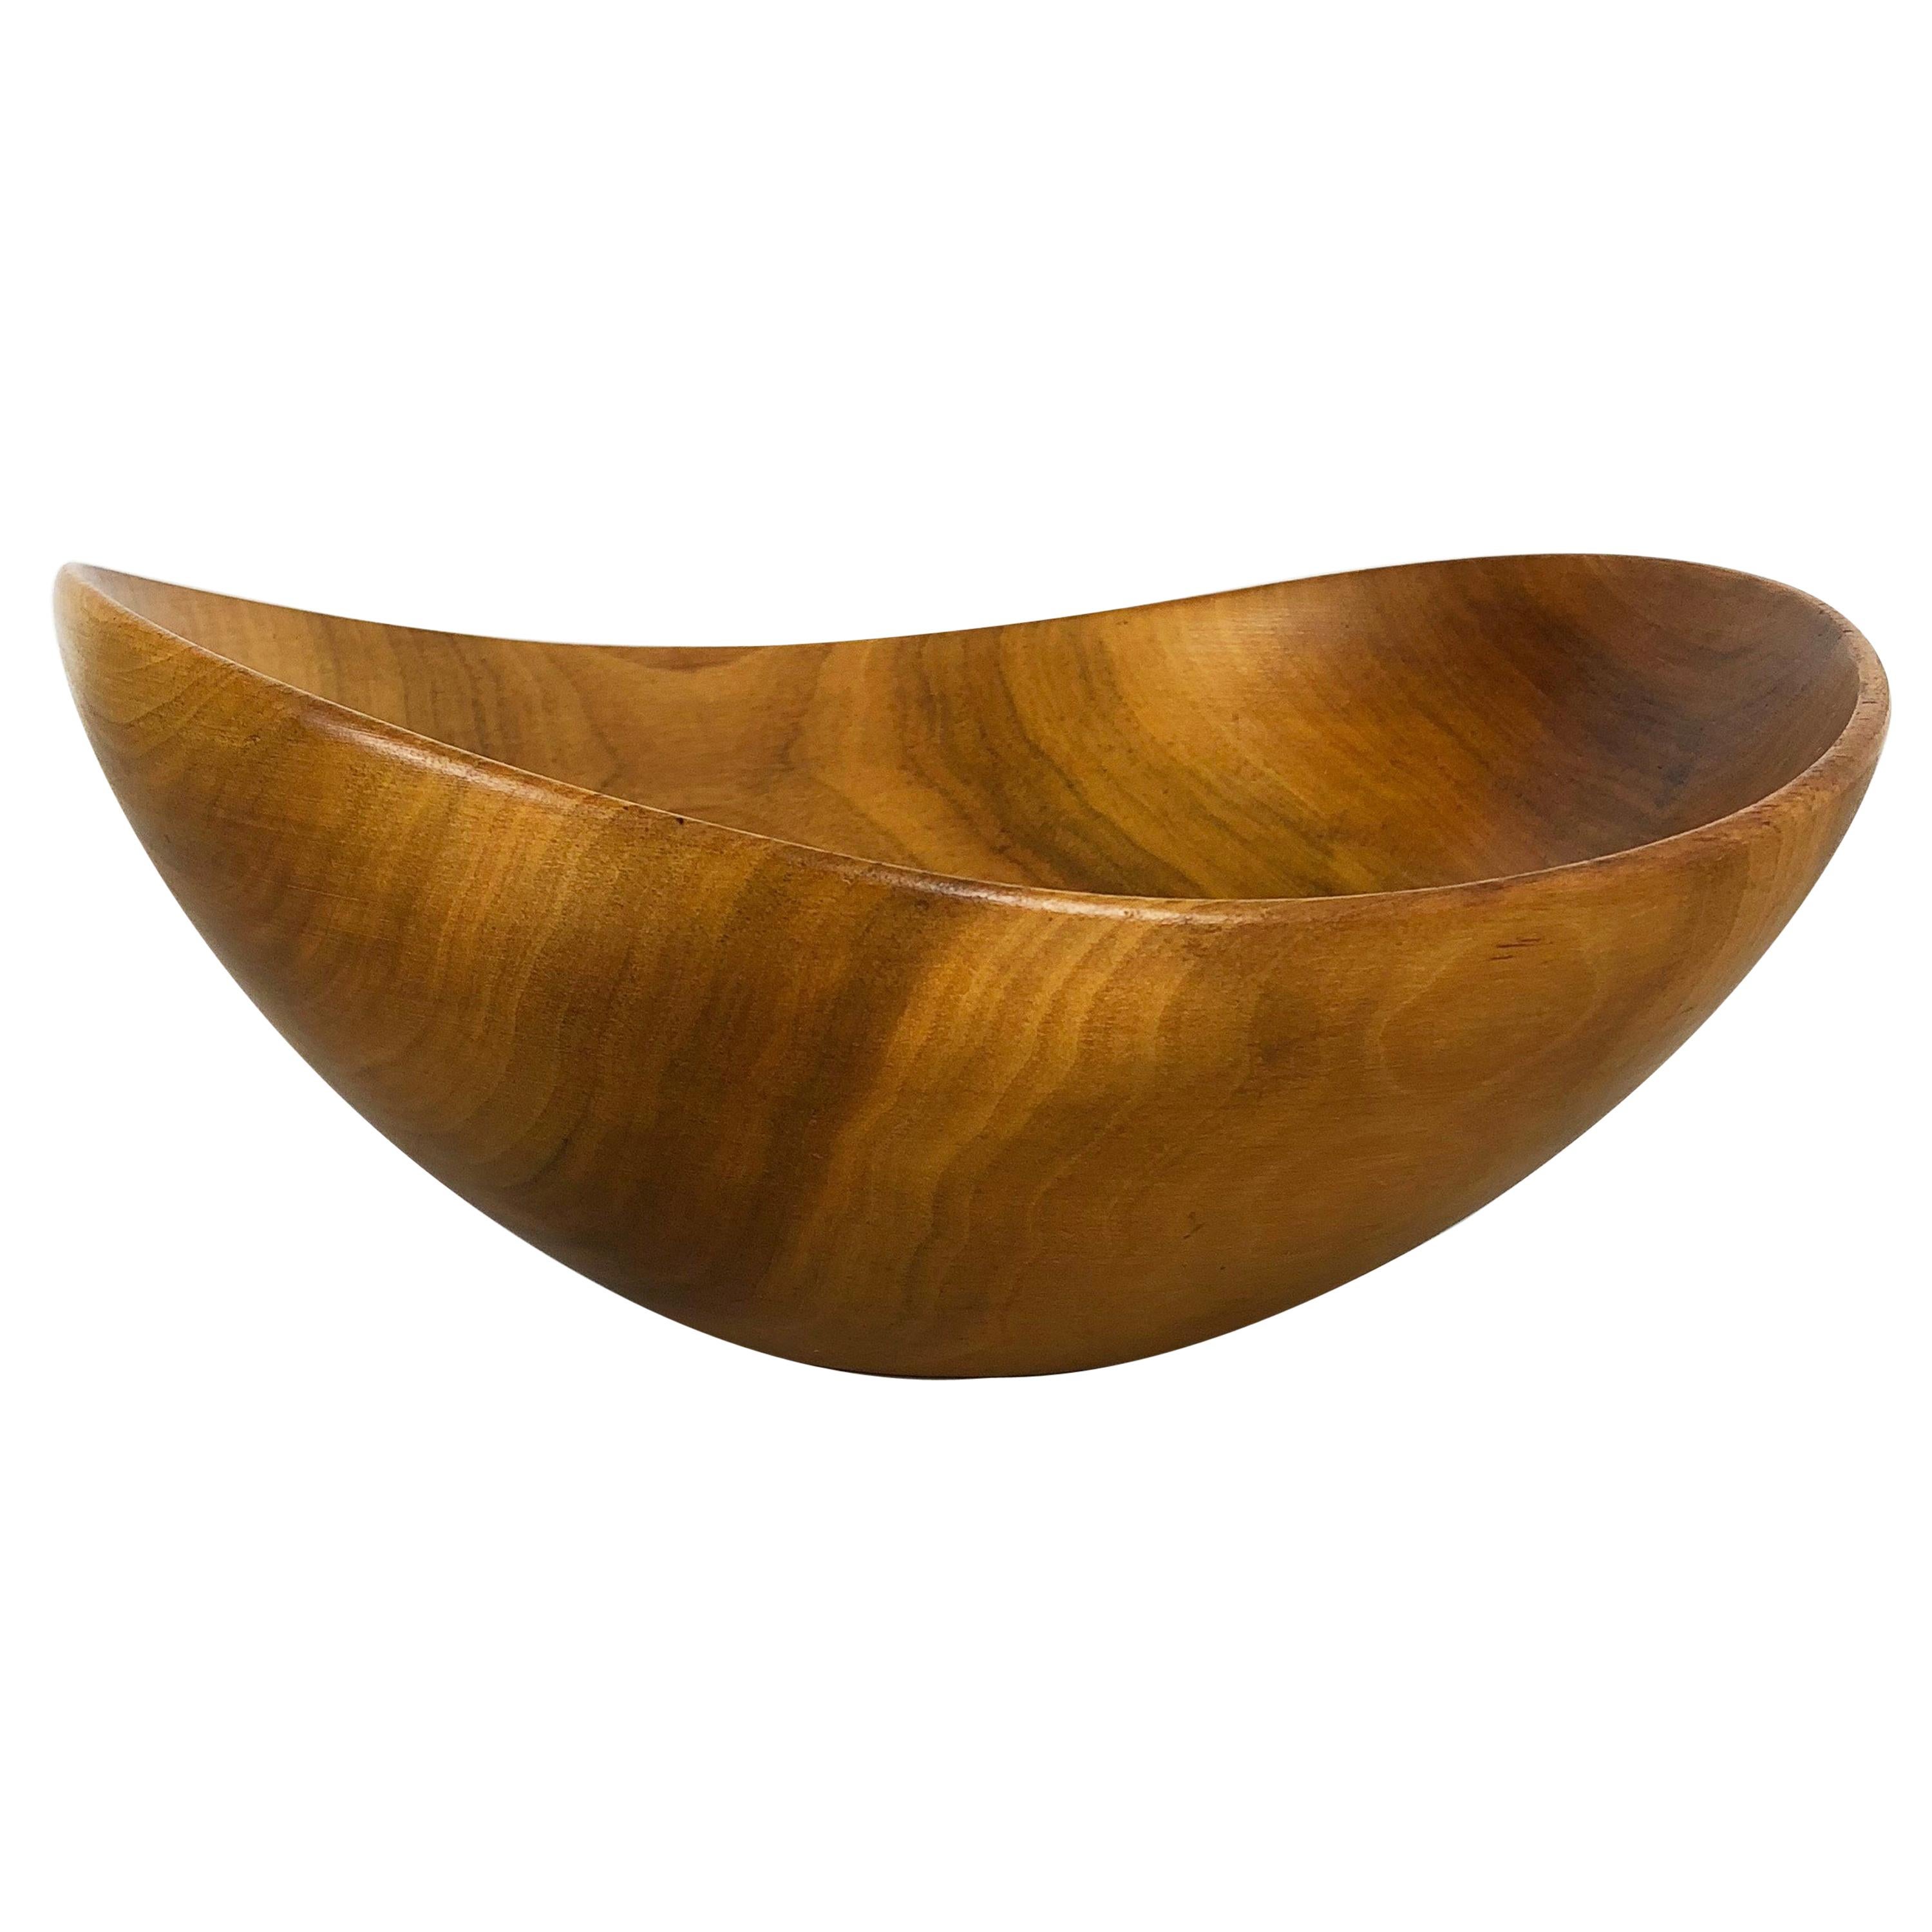 Extra Large Original Vintage Shell Bowl in Solid Walnut Wood, Germany, 1970s